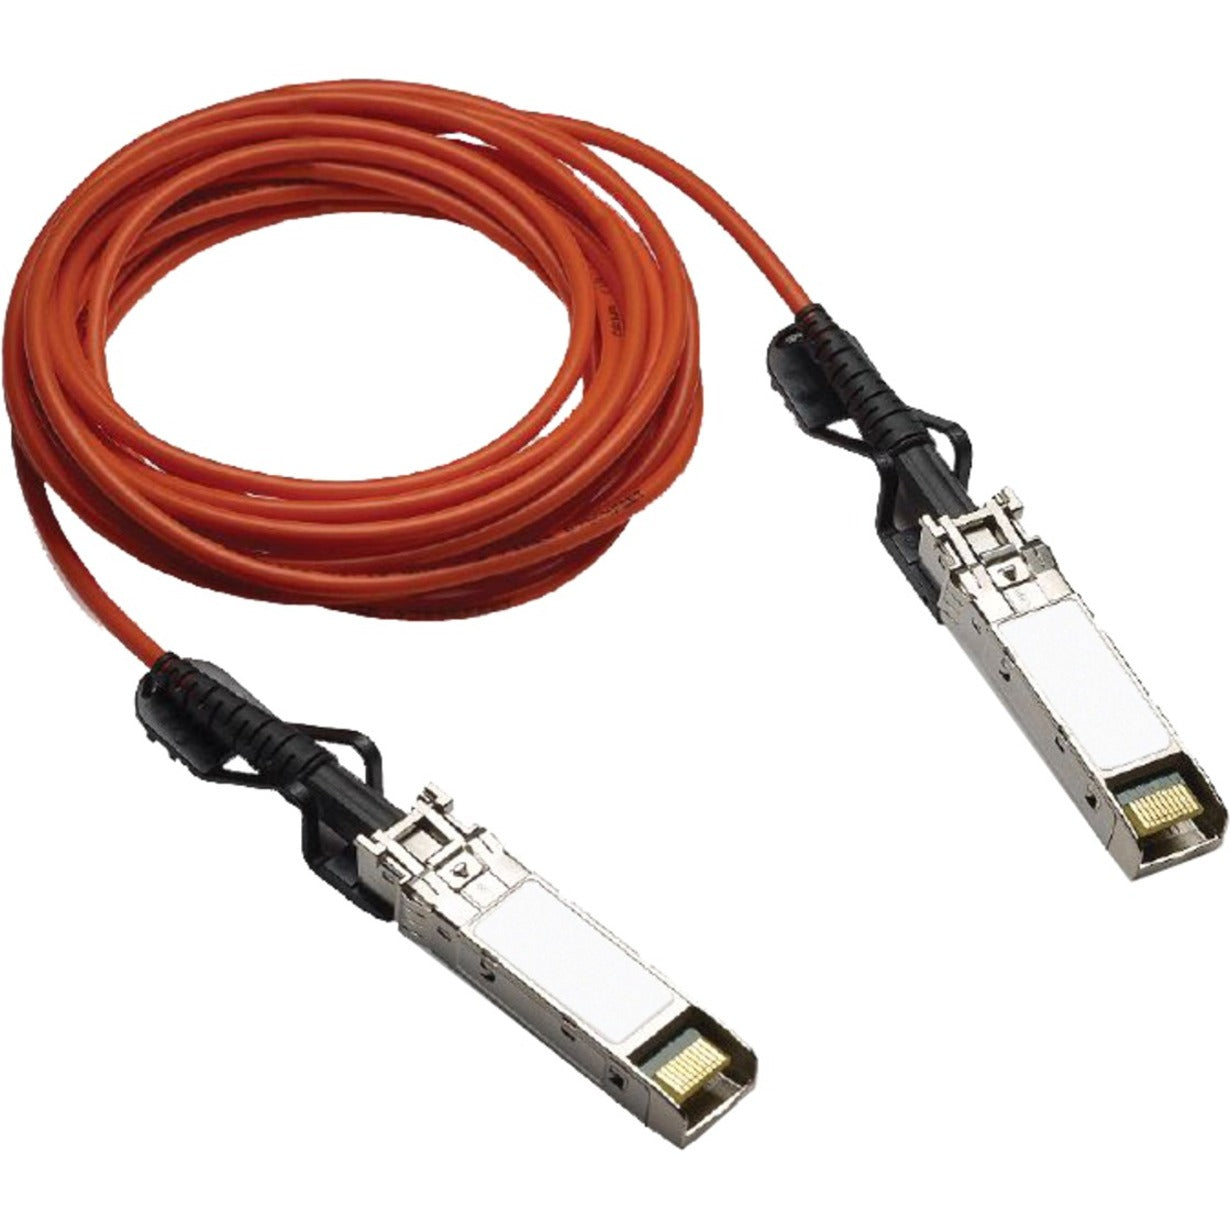 Aruba J9285D 10G SFP+ to SFP+ 7m DAC Cable, High-Speed Data Transfer for Network Devices